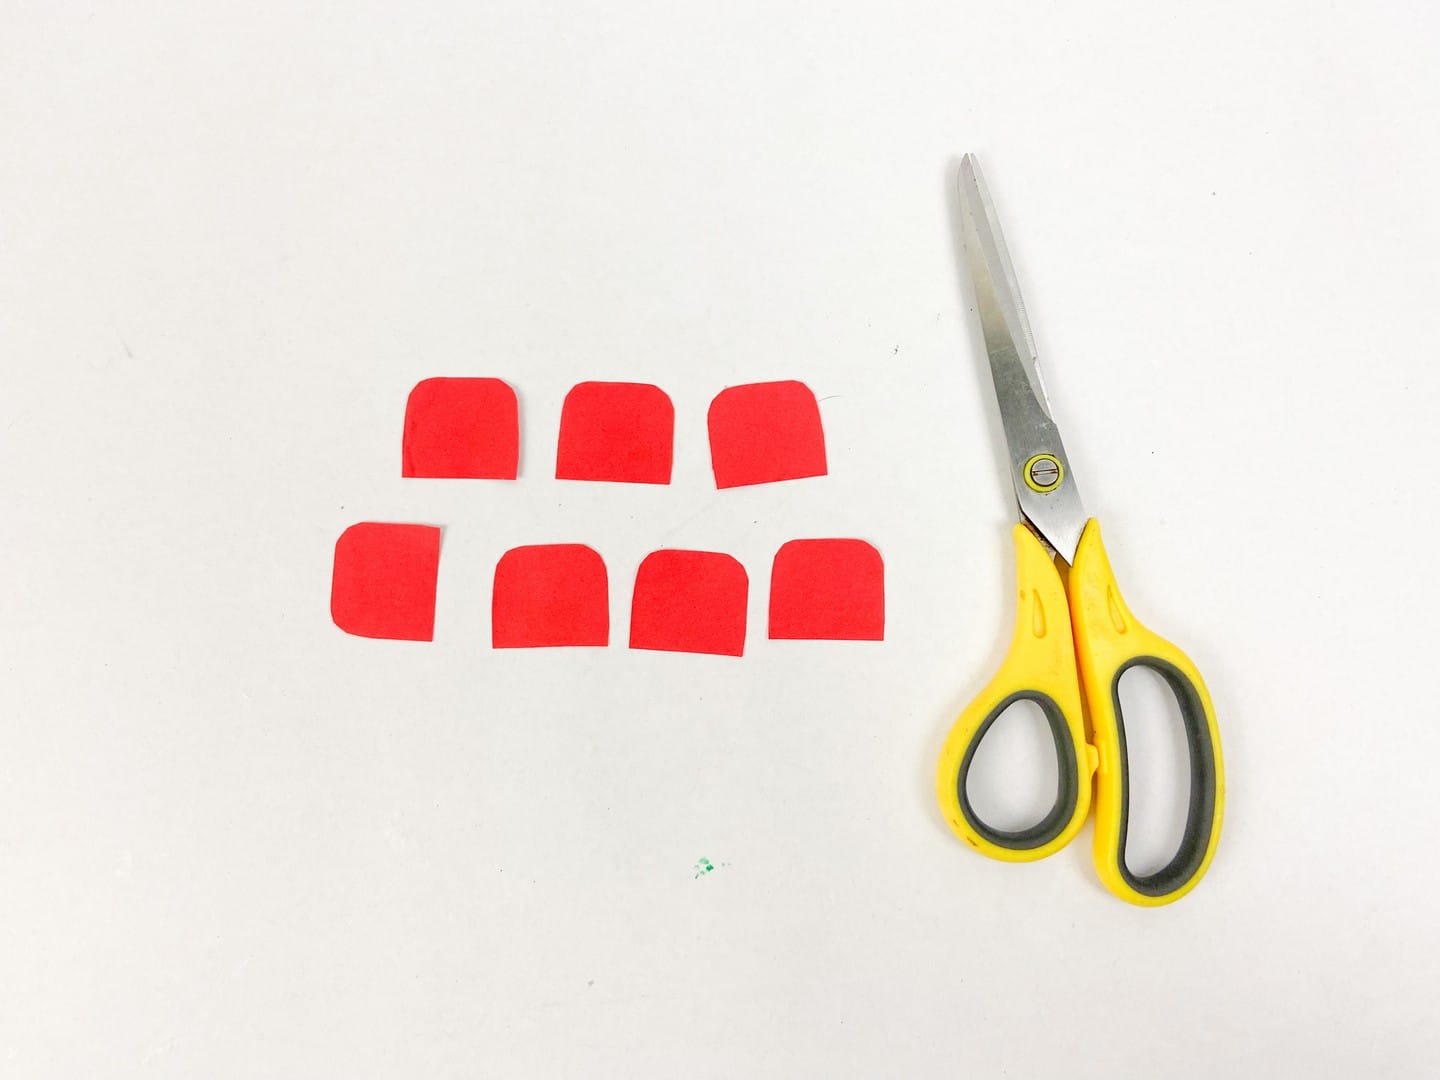 Yellow handled scissors with red cut outs made to look like erasers. 